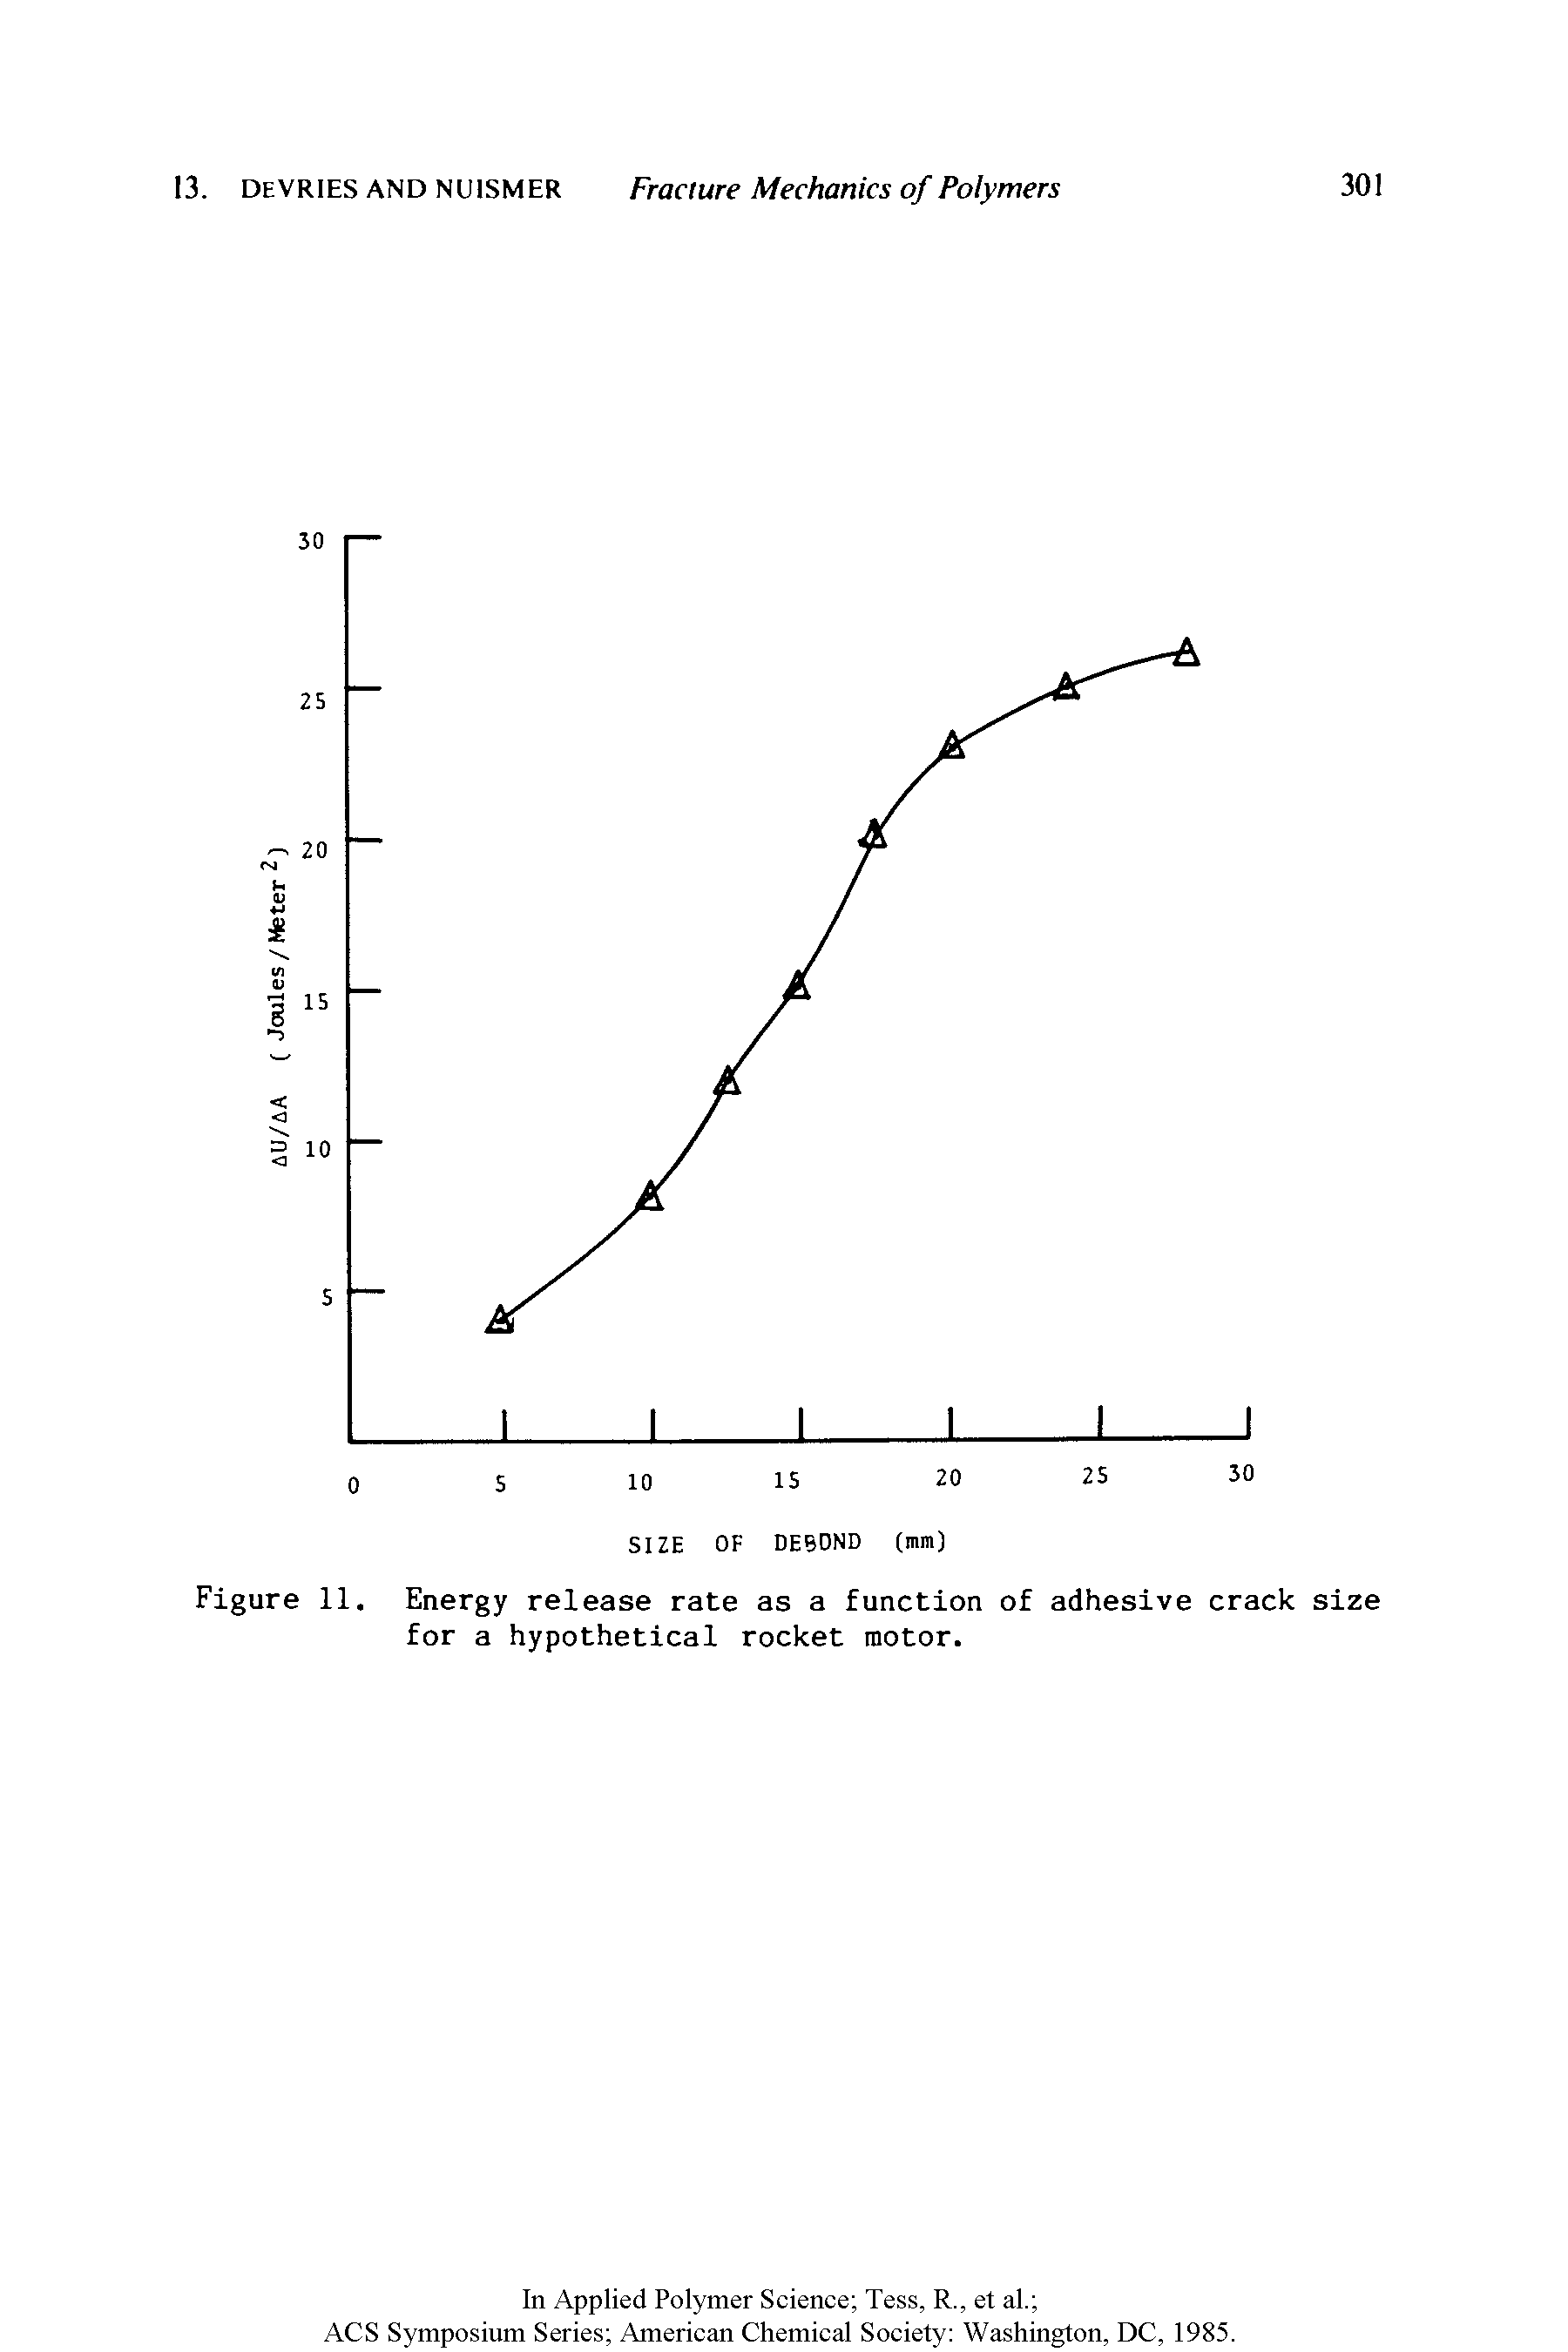 Figure 11, Energy release rate as a function of adhesive crack size for a hypothetical rocket motor.